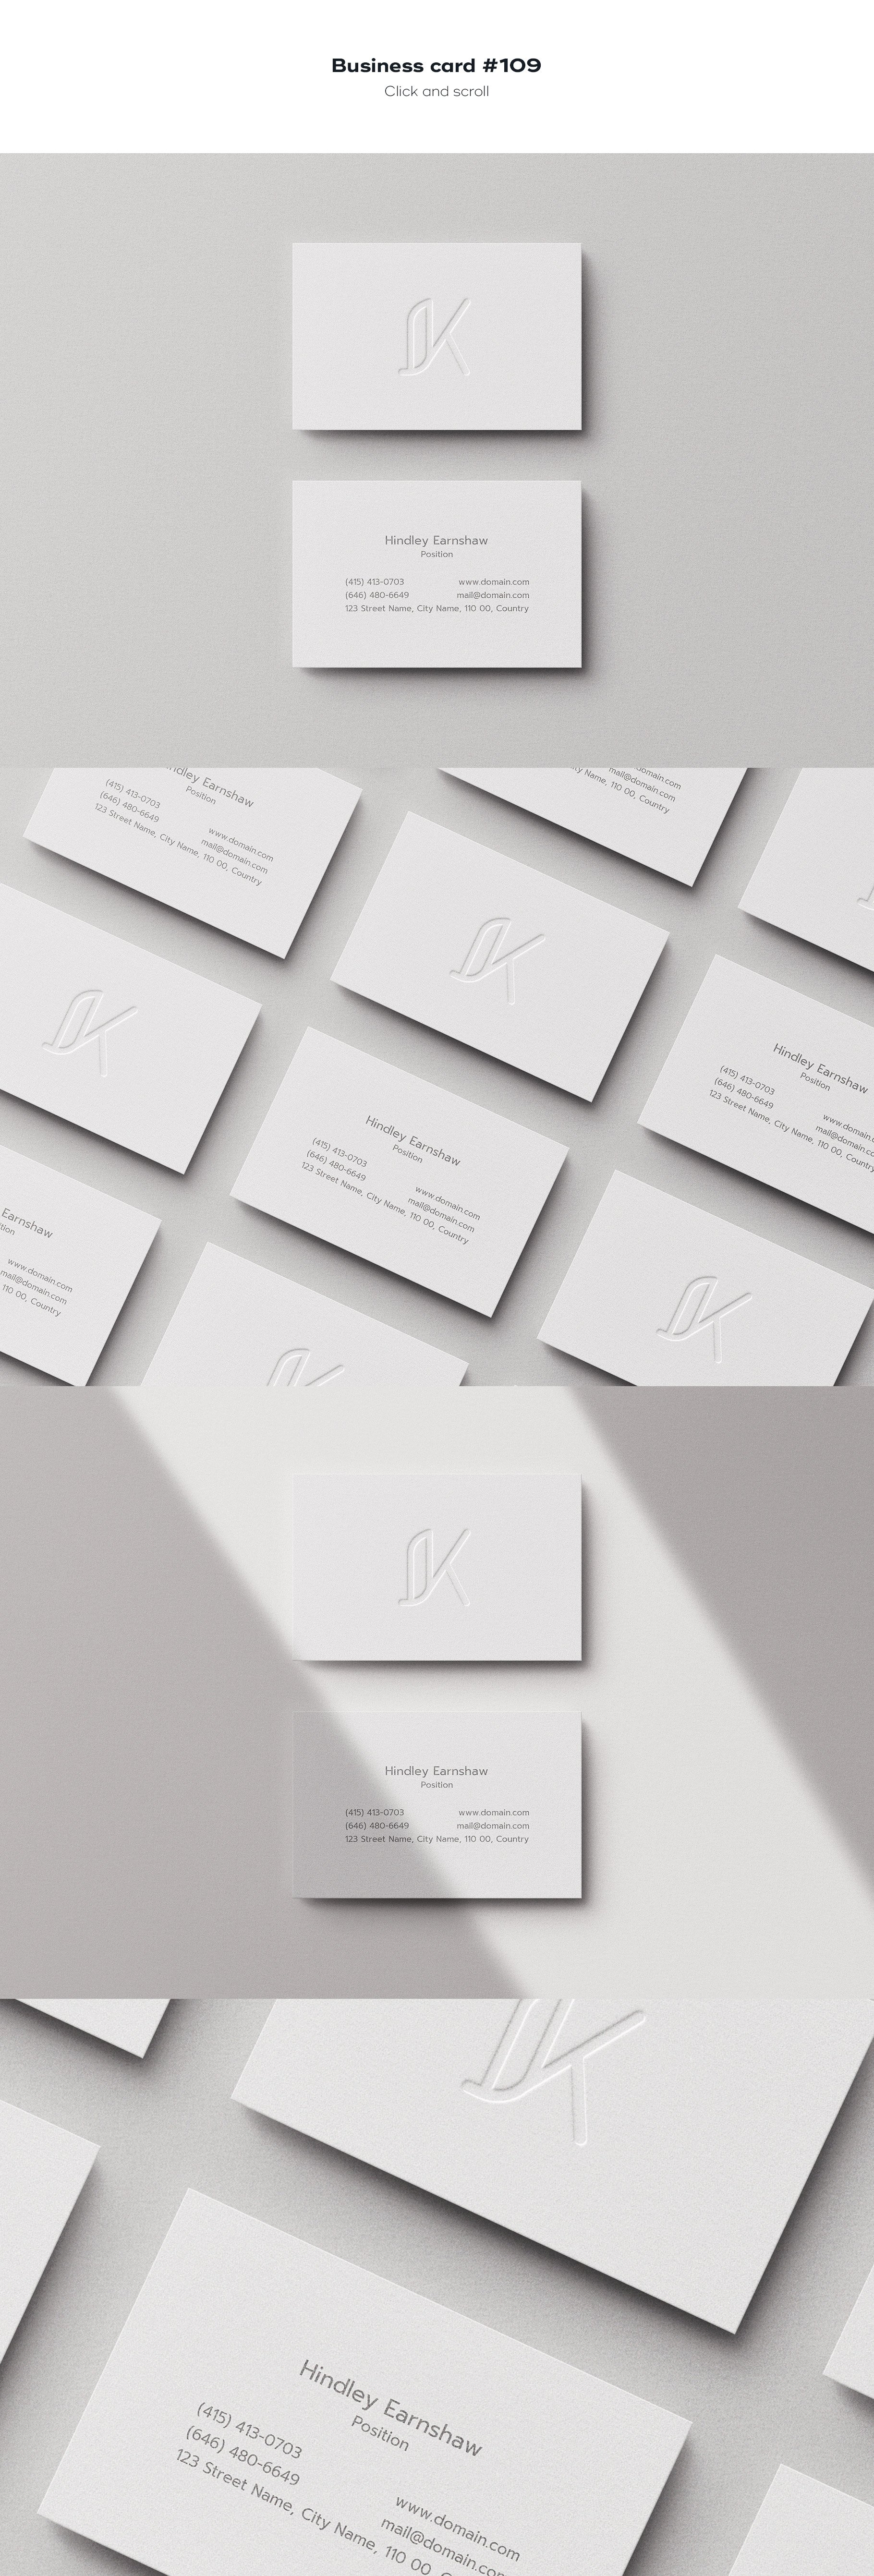 business card 109 612